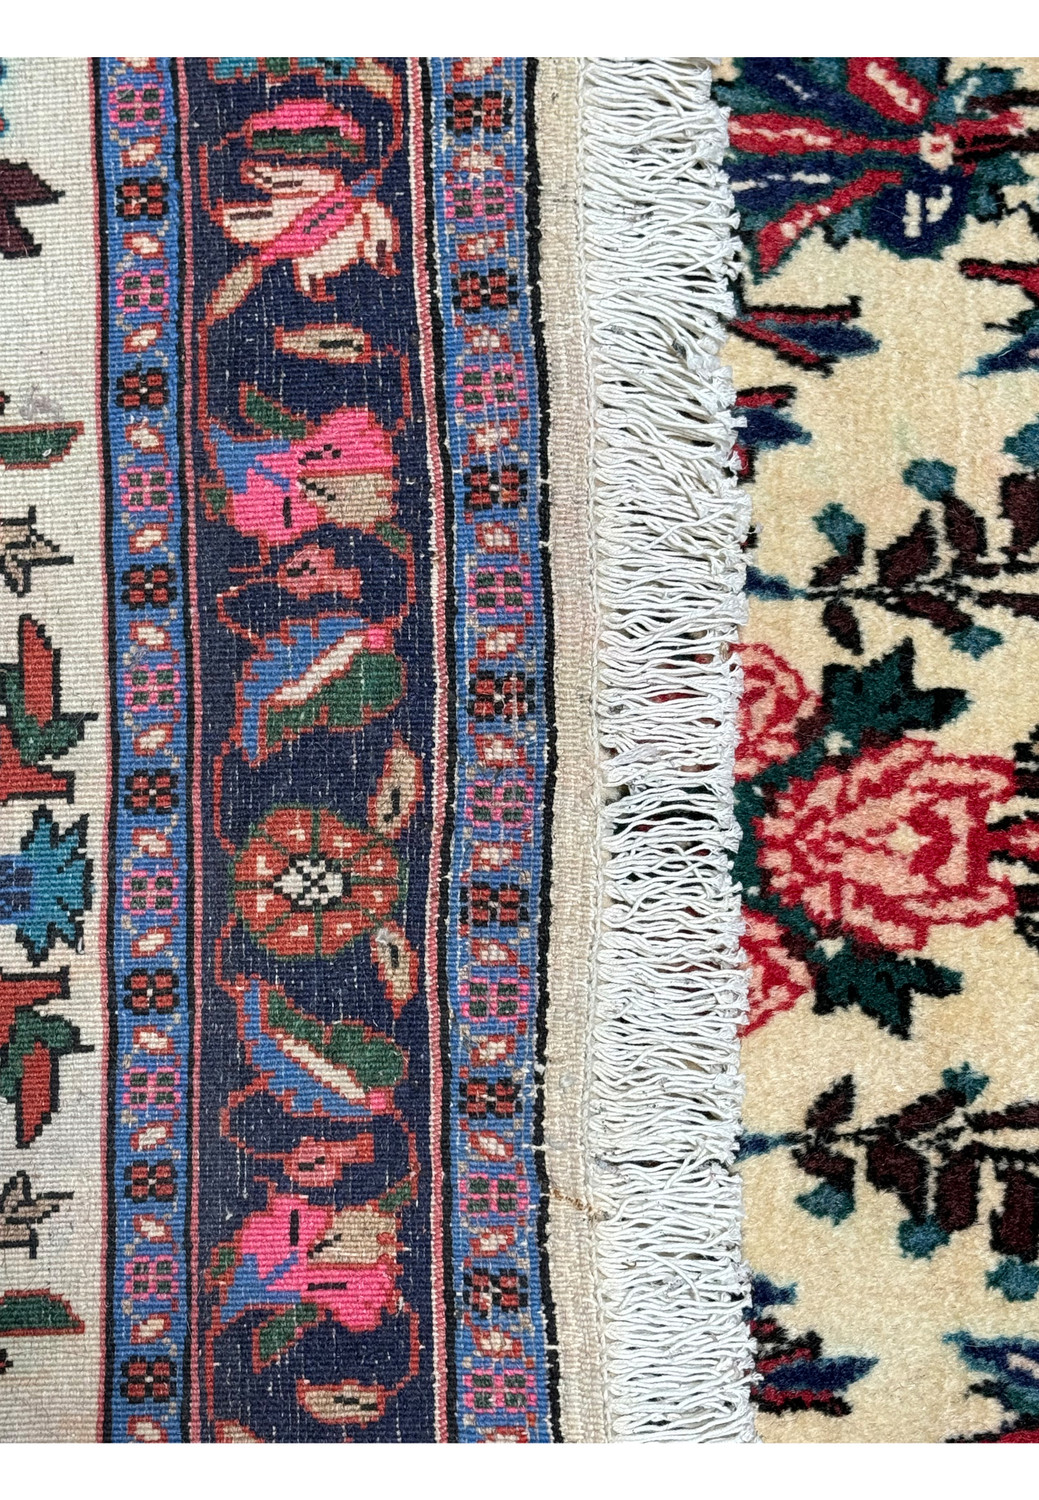 Underside view of a Persian Bijar Rug, showcasing the fine weave and structure, indicative of its durability and authentic craftsmanship